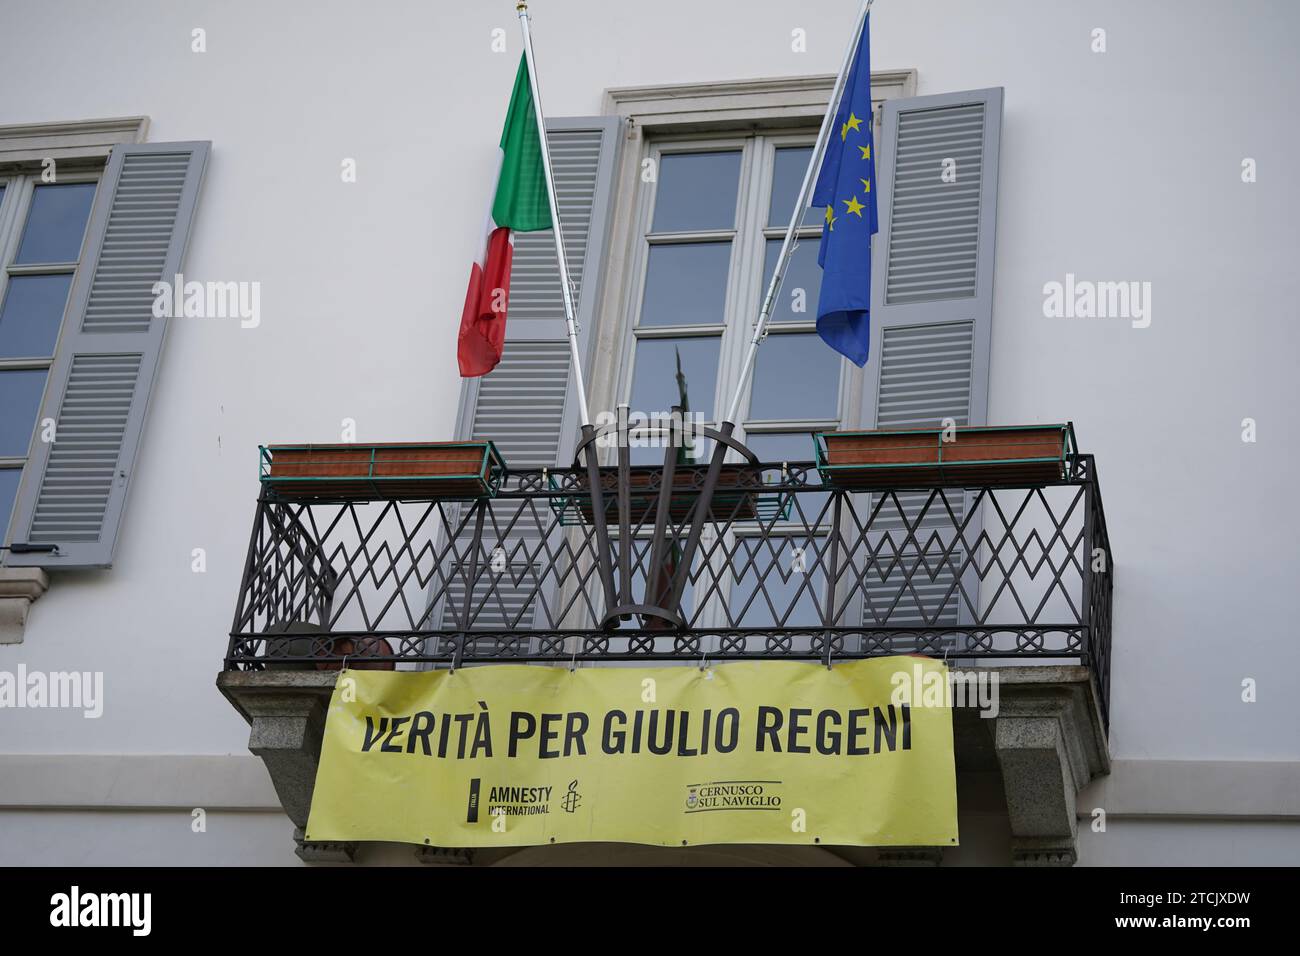 Monza, Italy. 12th Dec, 2023. Banner in the town hall of Cernusco for the truth about the death of Giulio Regeni. Cernusco sul Naviglio, Italy. 12 Dec, 2023.  Credit: Alessio Morgese/Alessio Morgese / Emage / Alamy live news Credit: Alessio Morgese/E-Mage/Alamy Live News Stock Photo